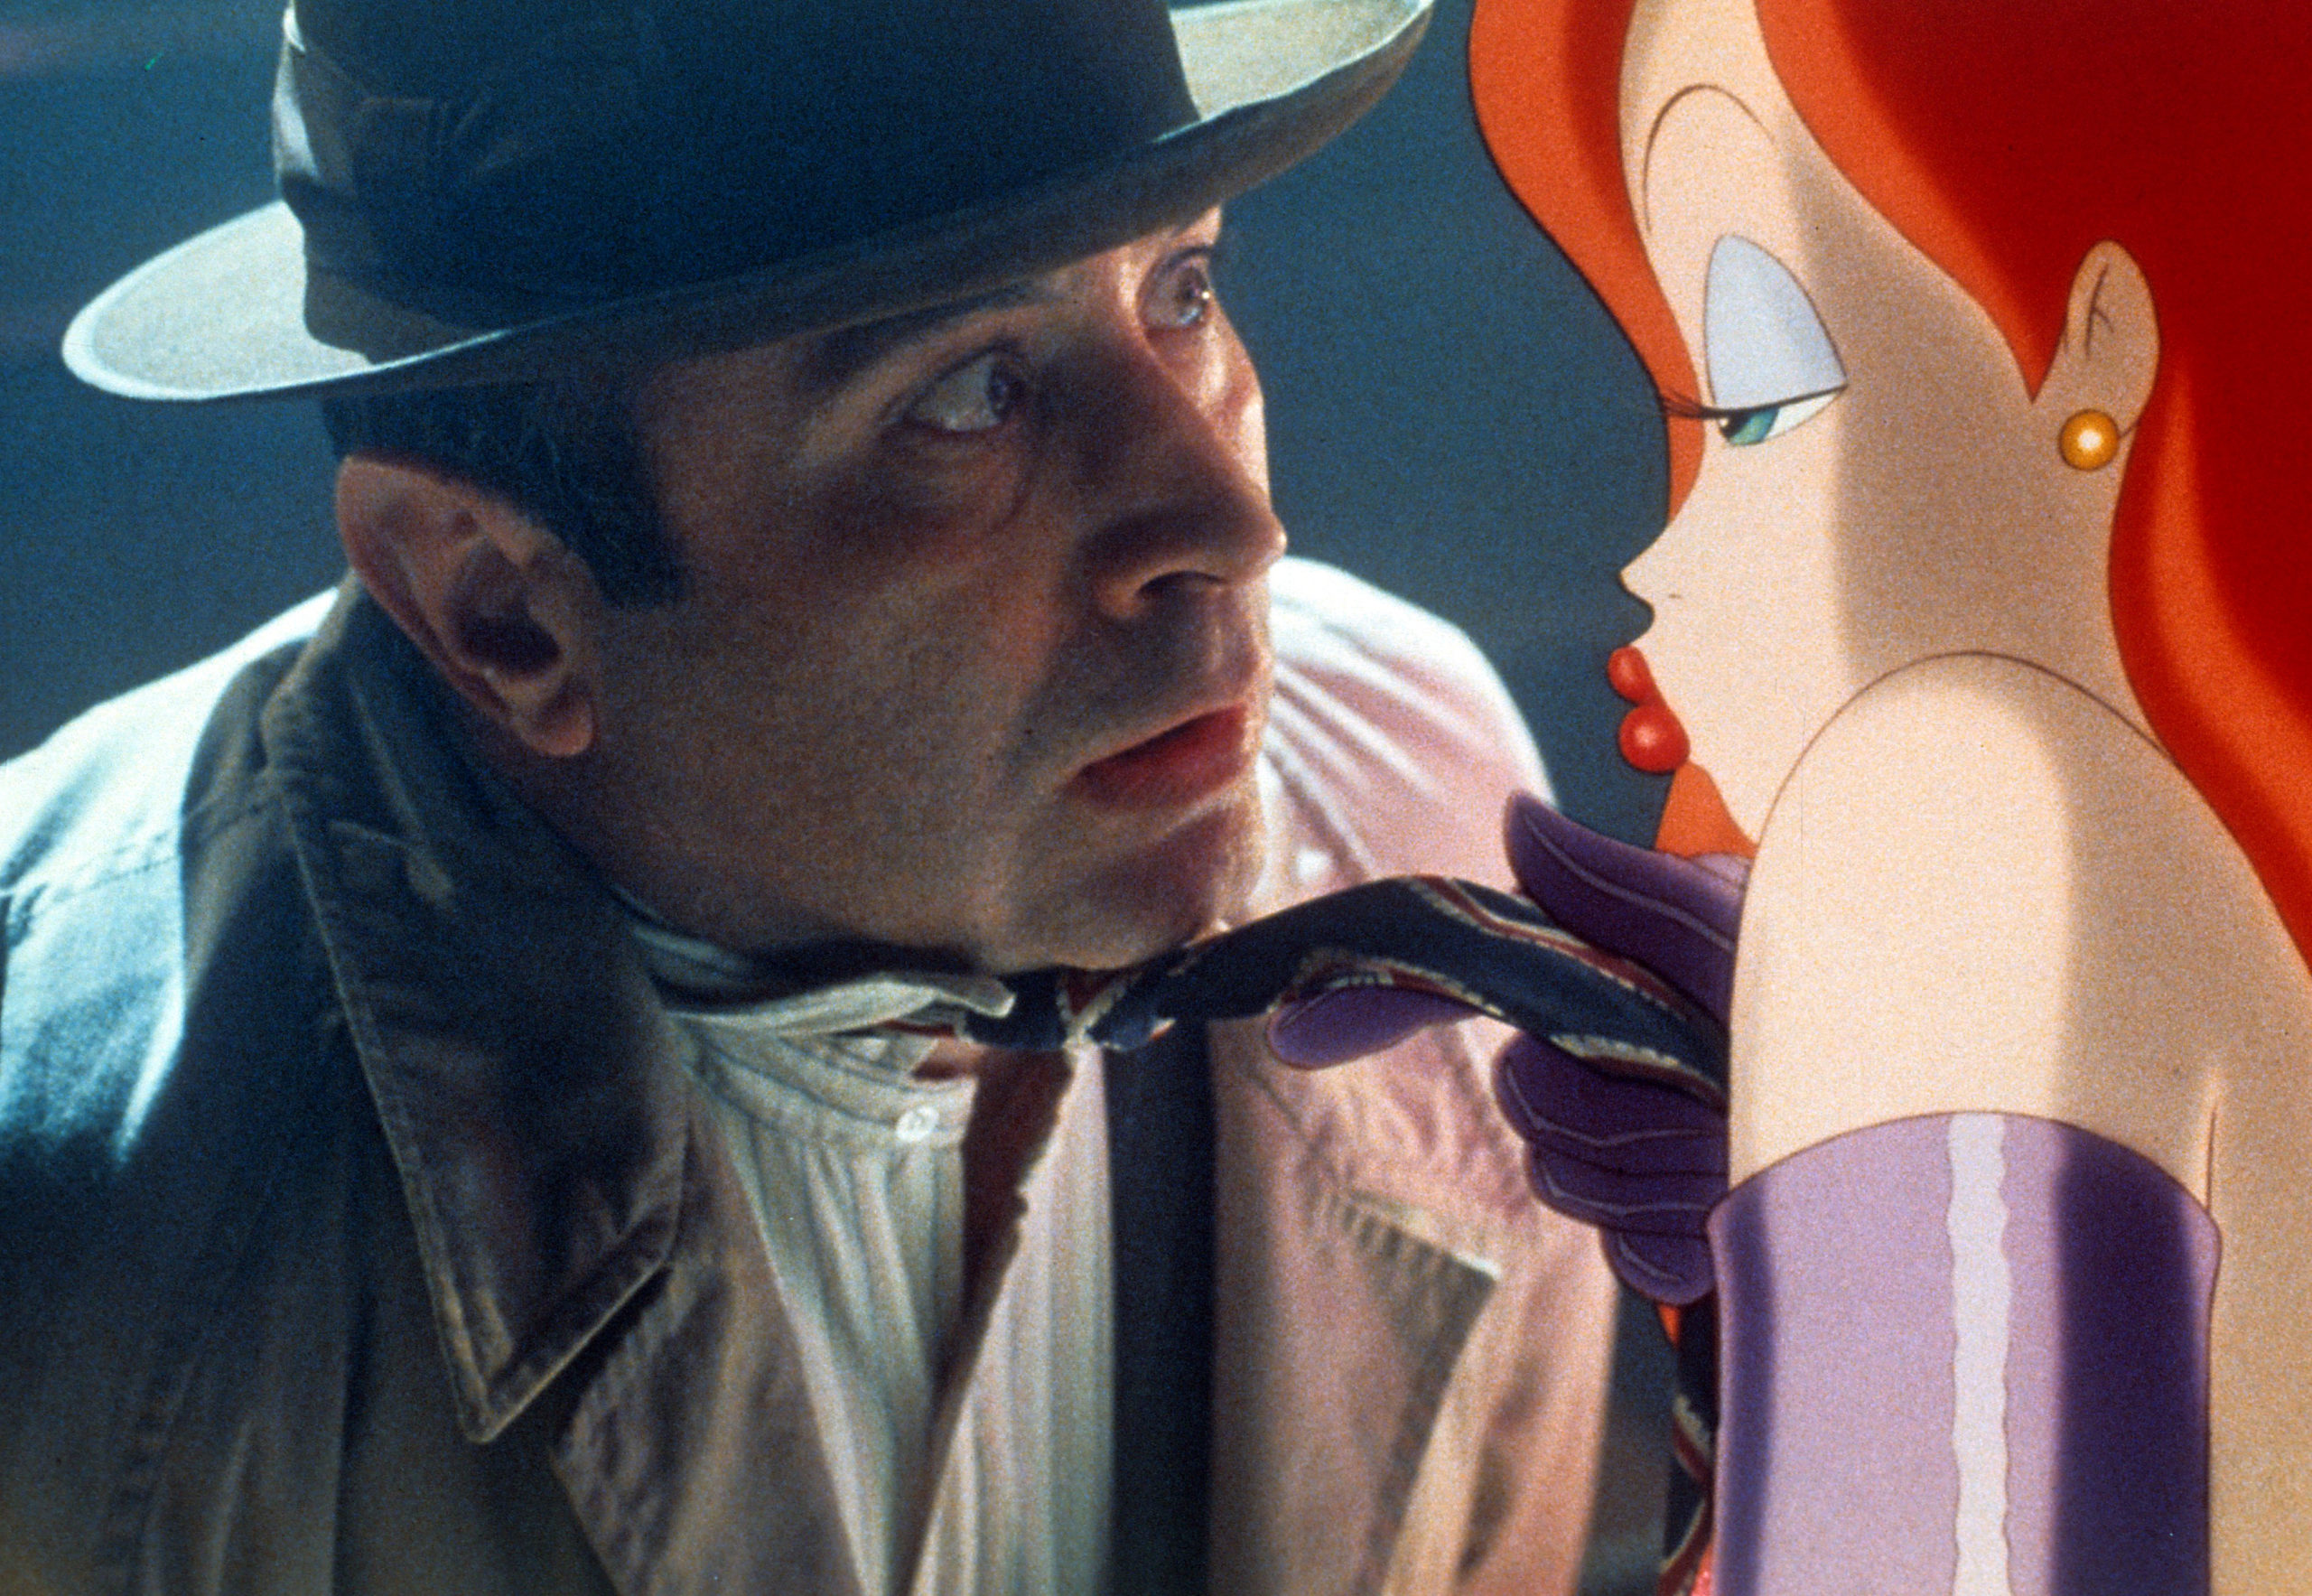 Bob Hoskins and Jessica Rabbit in a scene from the film. (Image: Disney, Getty)